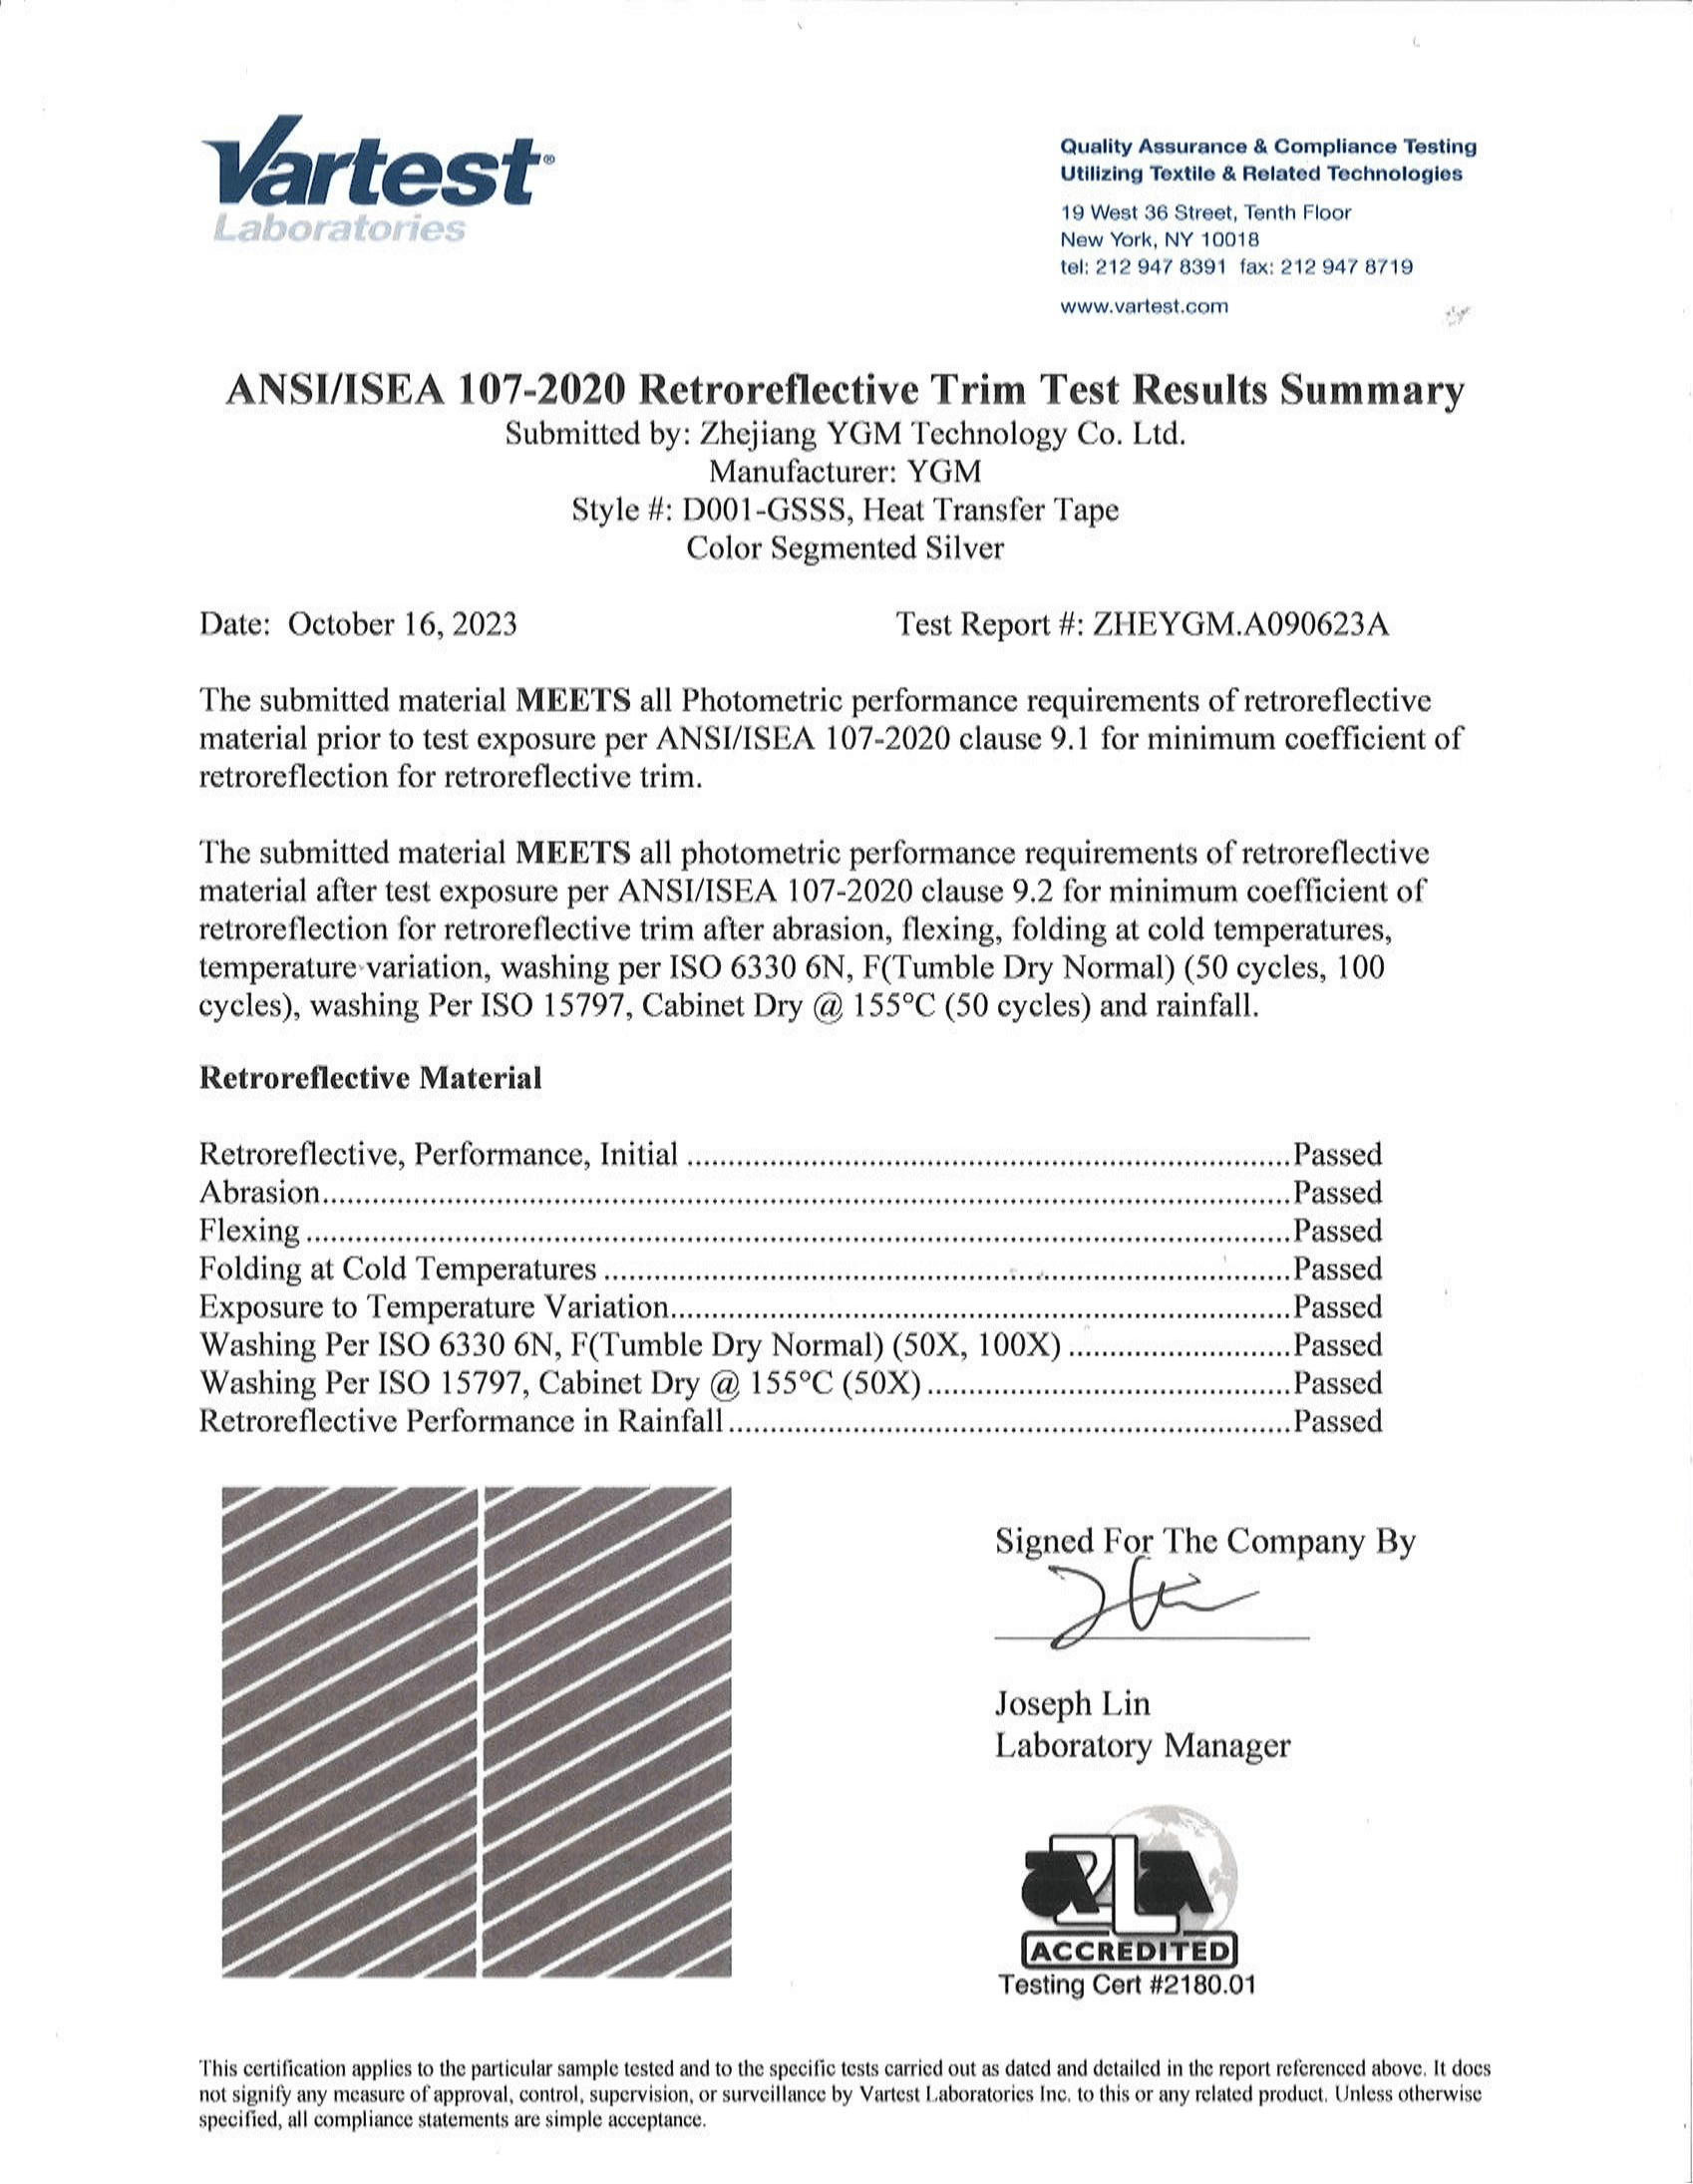 ANSI/ISEA 107 Certificate & Test Report for Heat Transfer Tape Color Segmented Silver(D001-GSSS Product)2